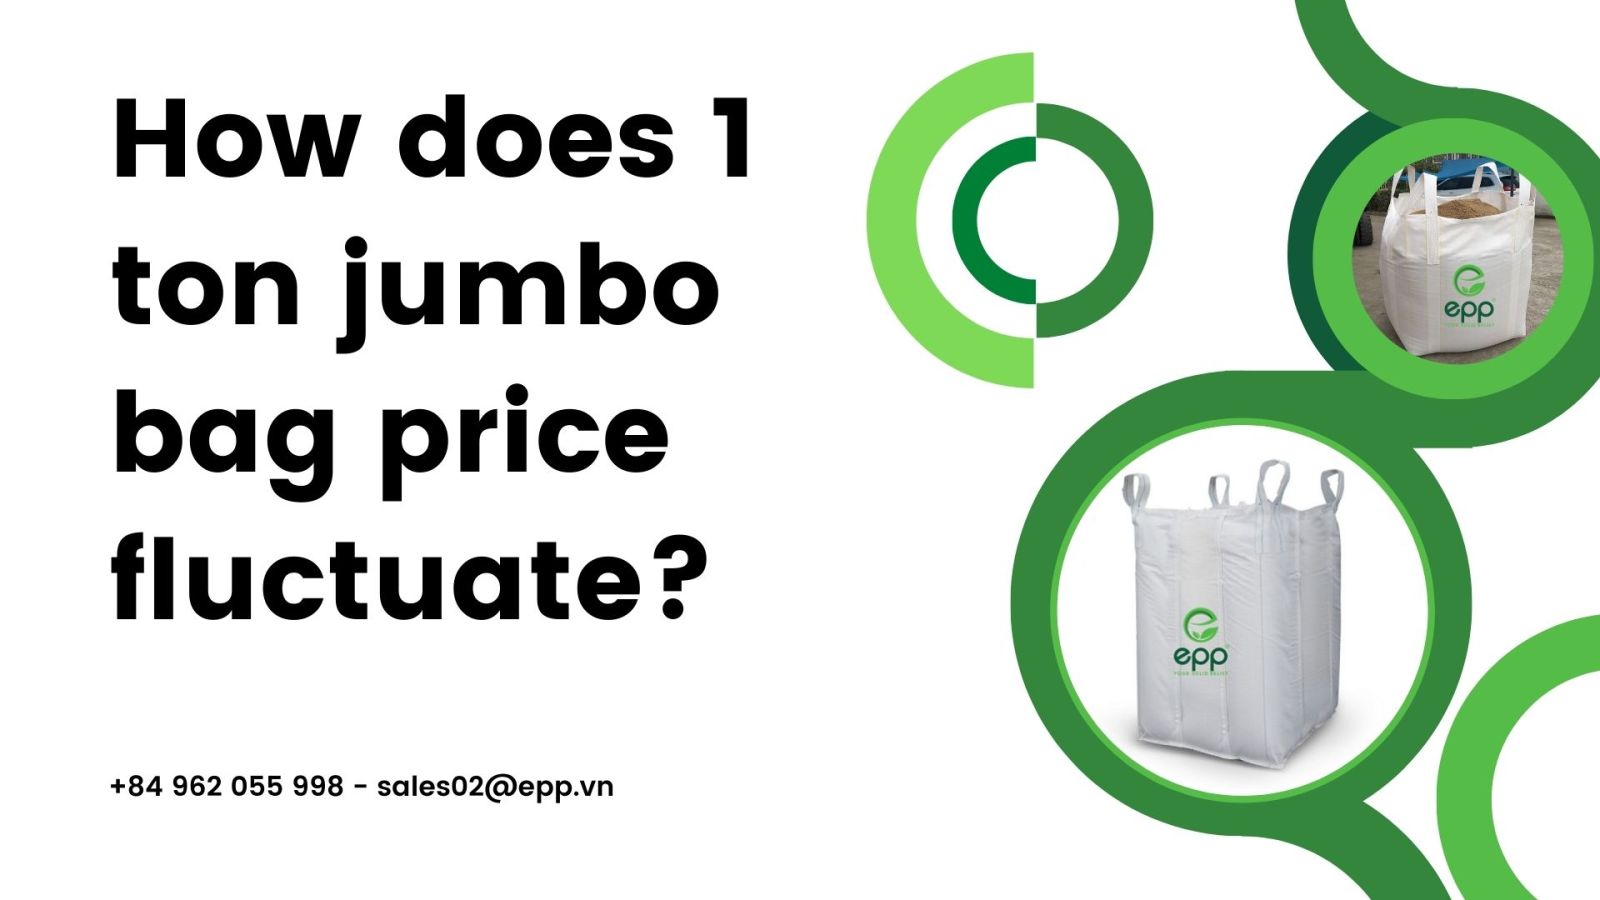 How-does-1-ton-jumbo-bag-price-fluctuate.jpg